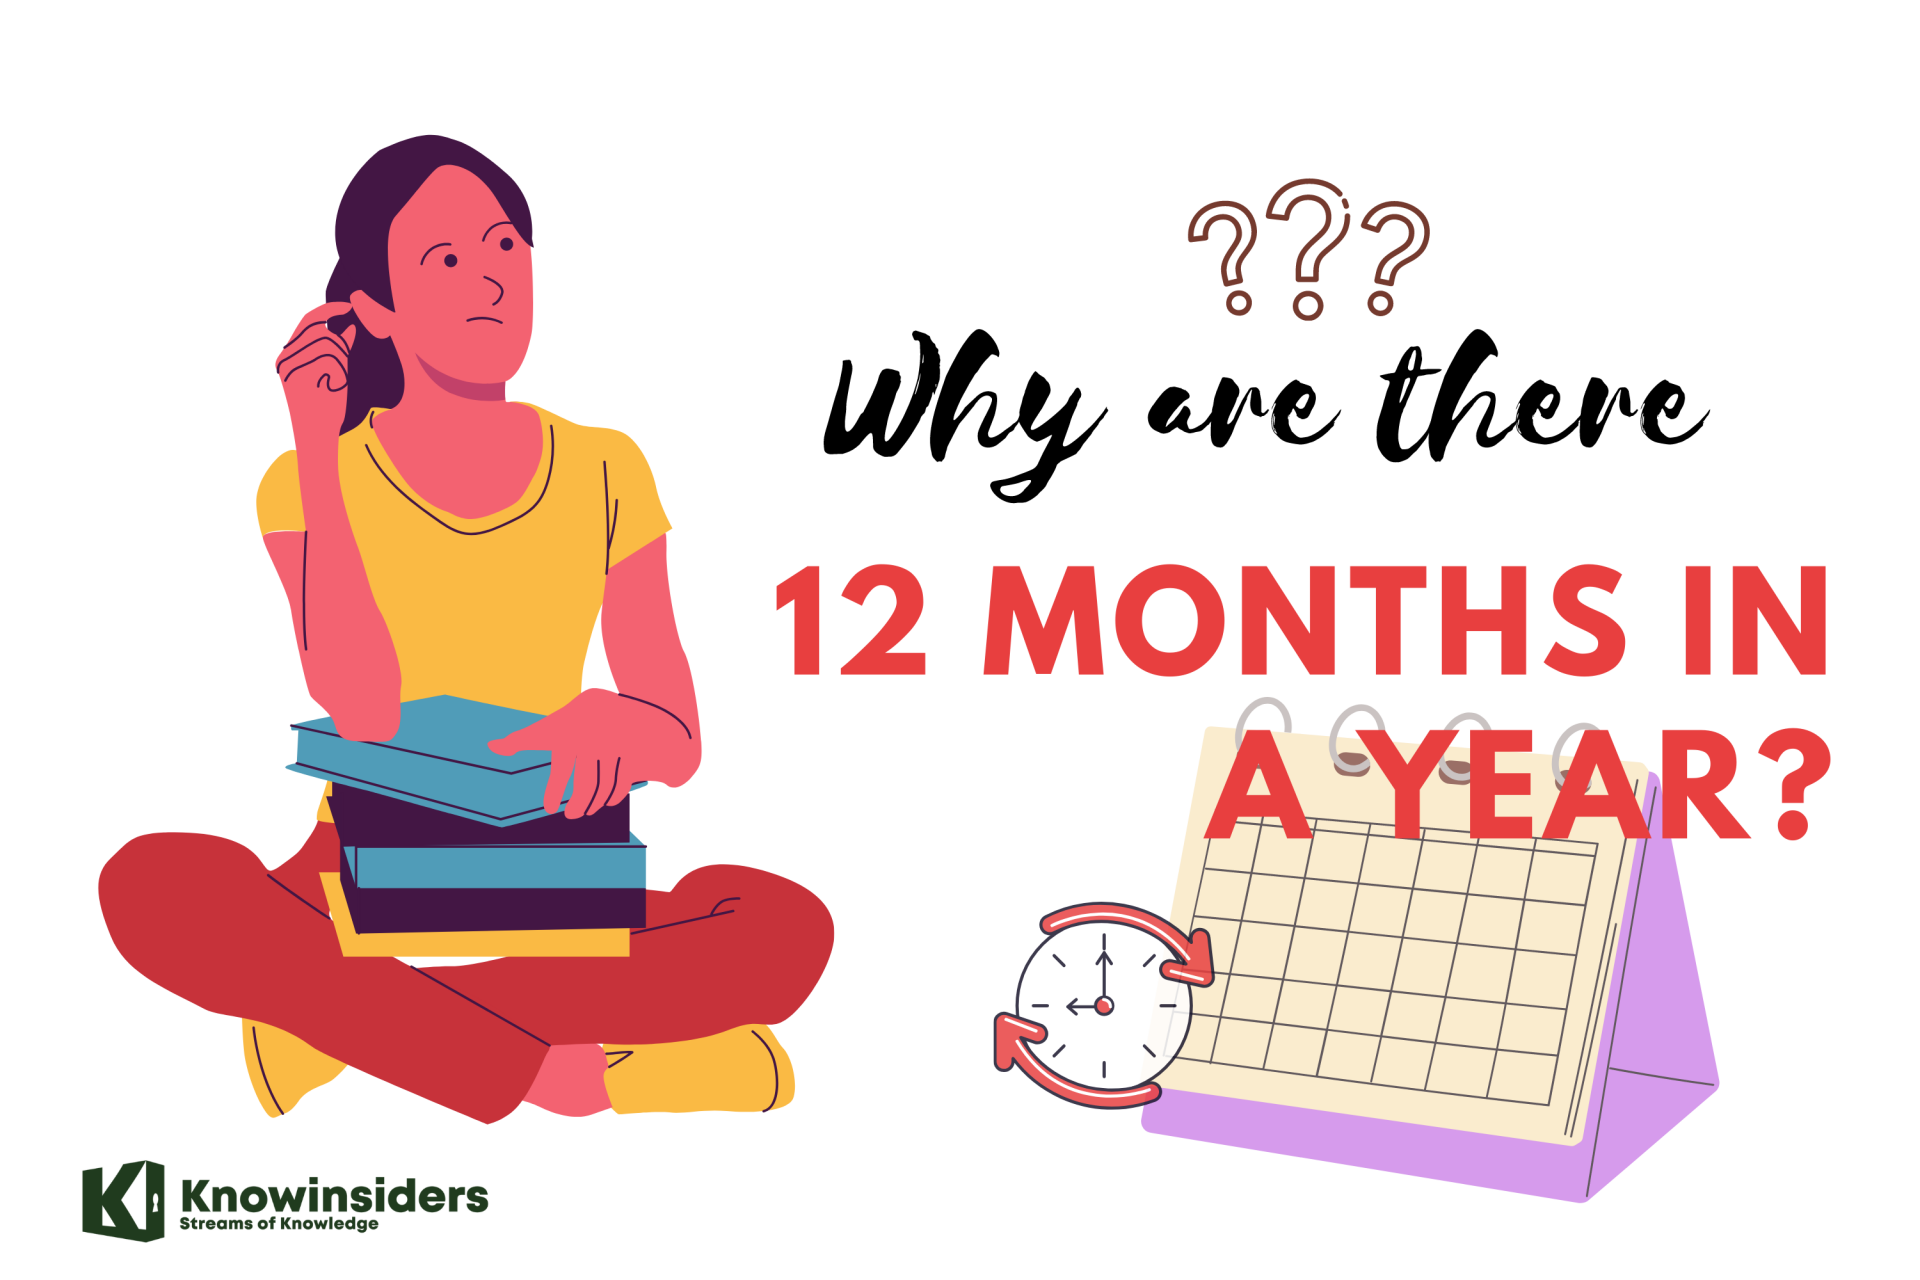 Why are There 12 Months in a Year?